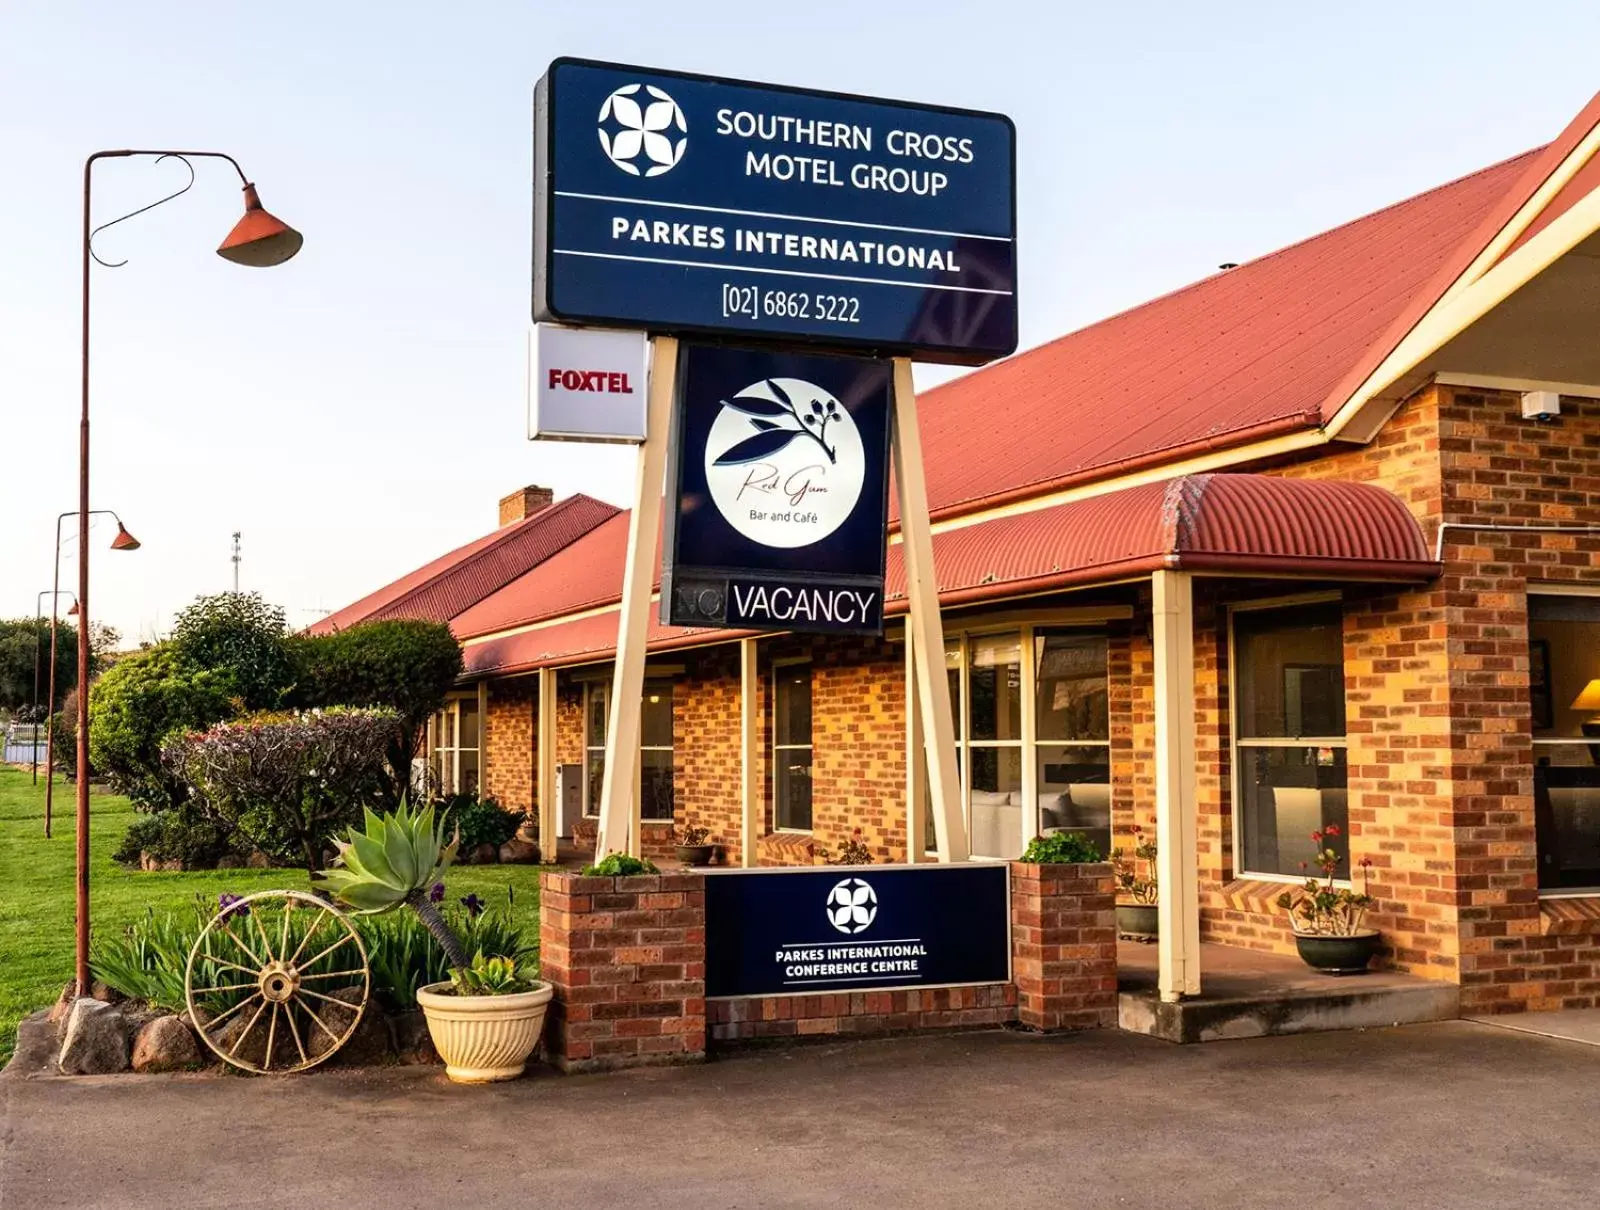 Property logo or sign in Parkes International